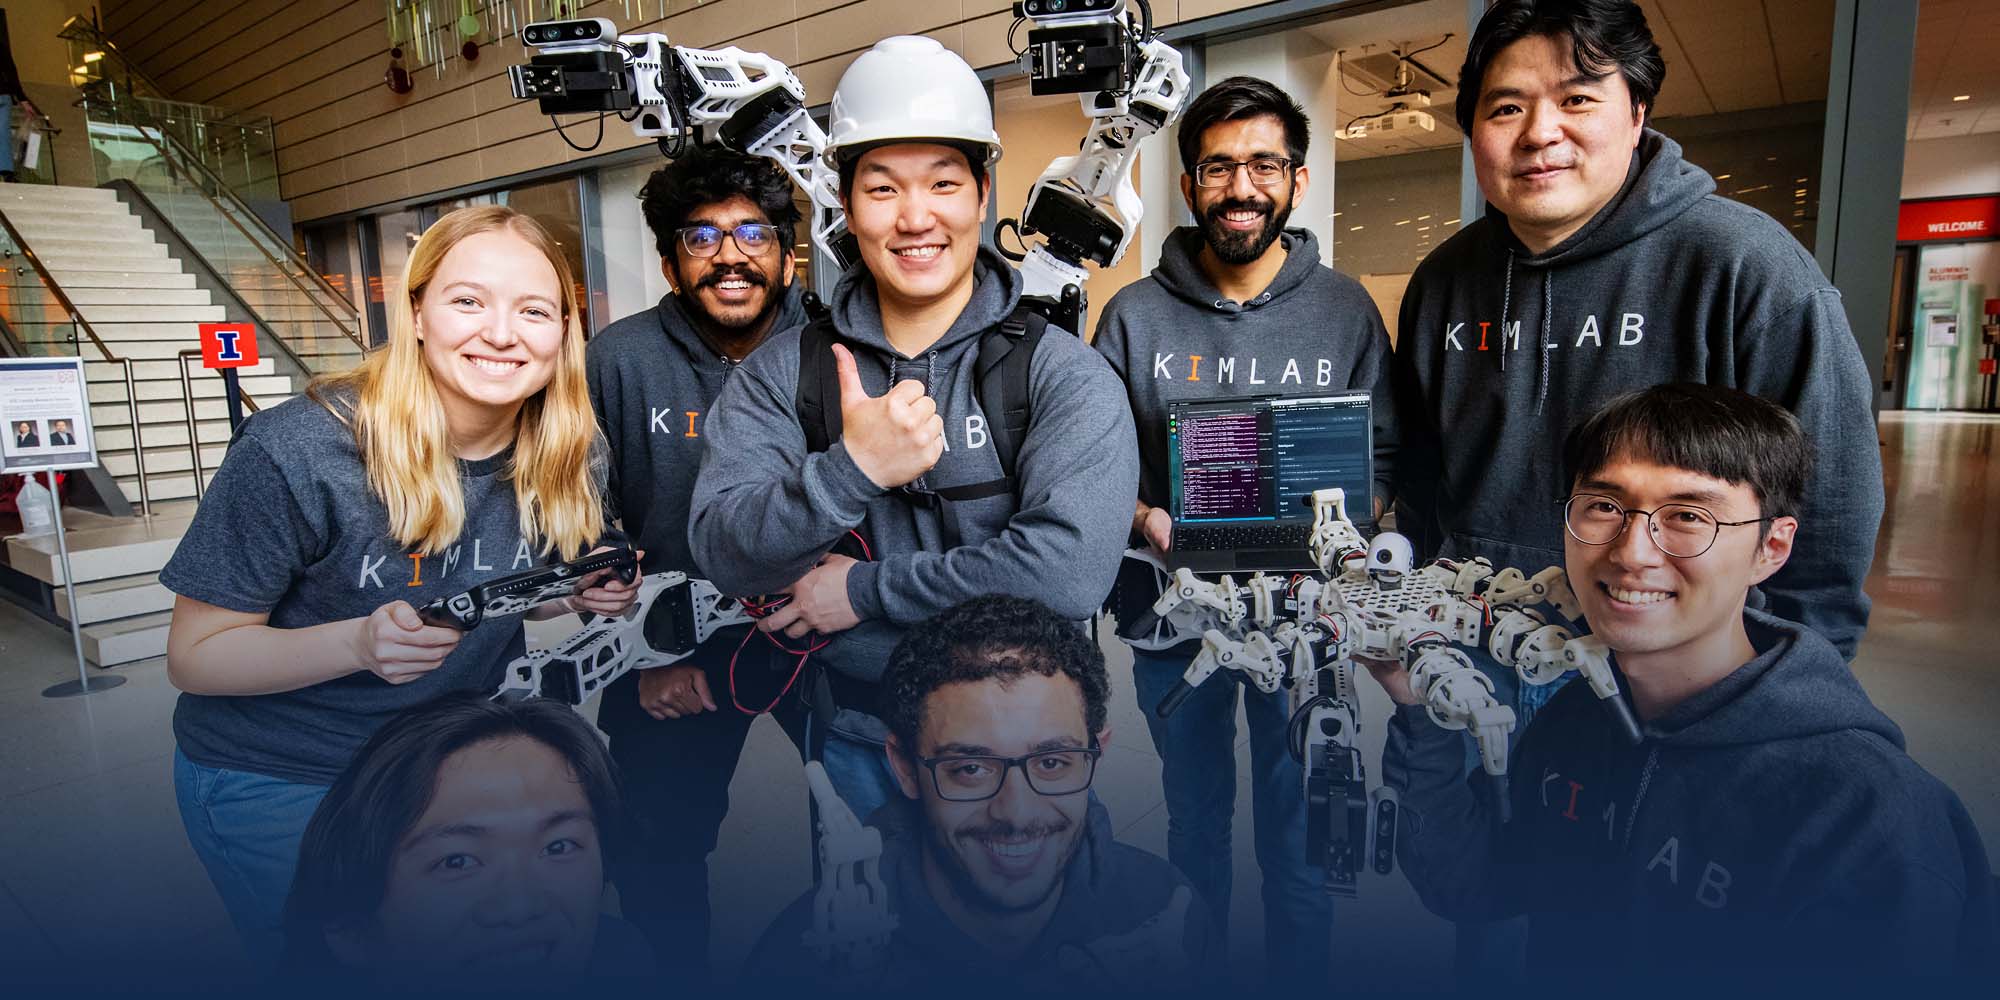 members of KIMLAB (Kinetic Intelligent Machine LAB) present their work on task/data-driven robot design, motion control, and interaction at the Grainger College of Engineering Open House event